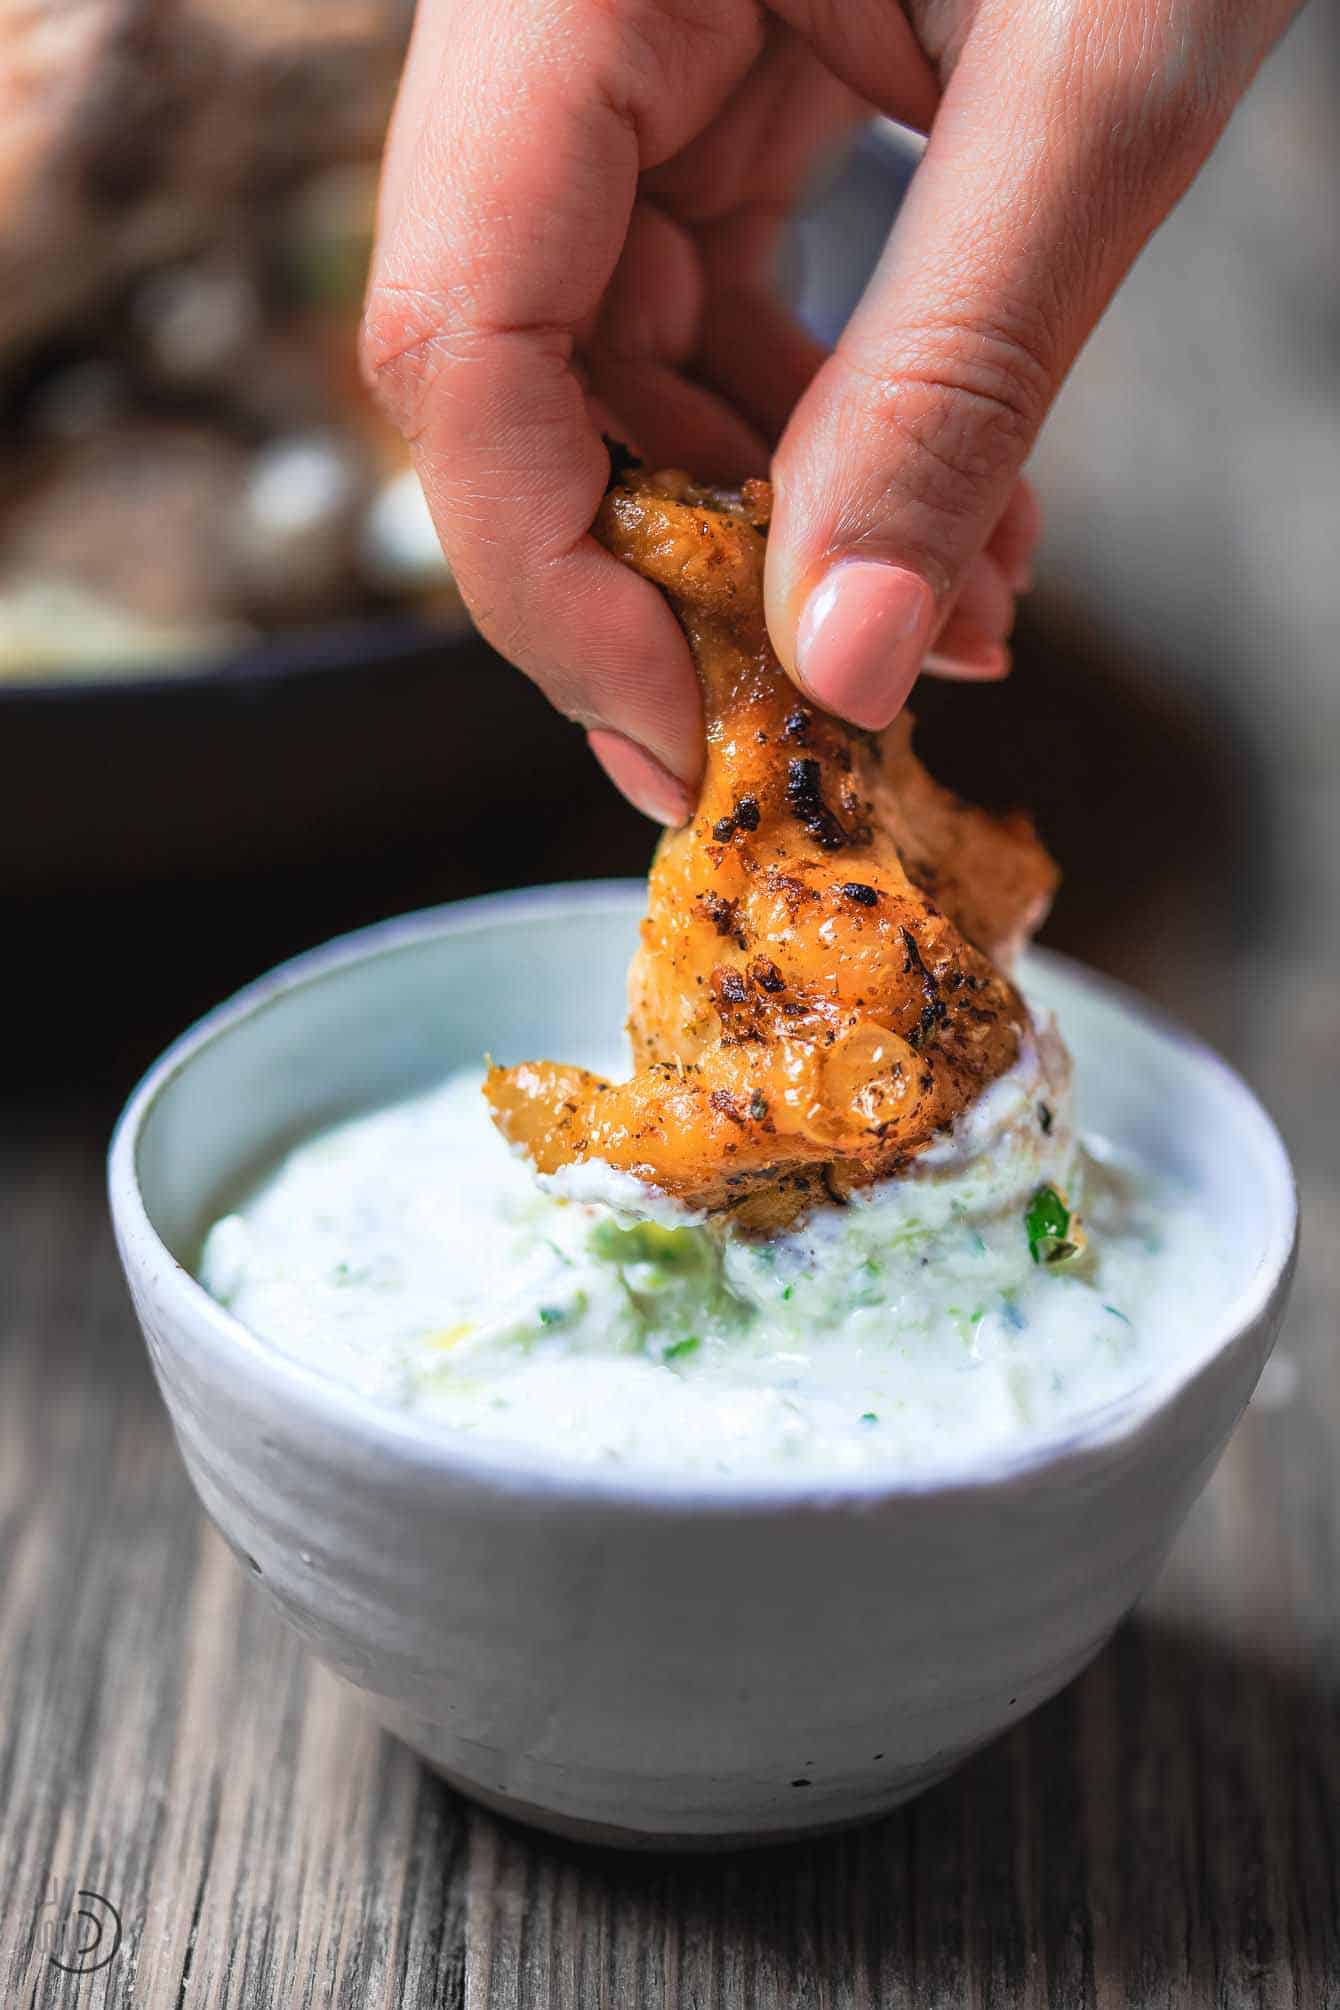 baked wing being dipped in Tzatziki sauce